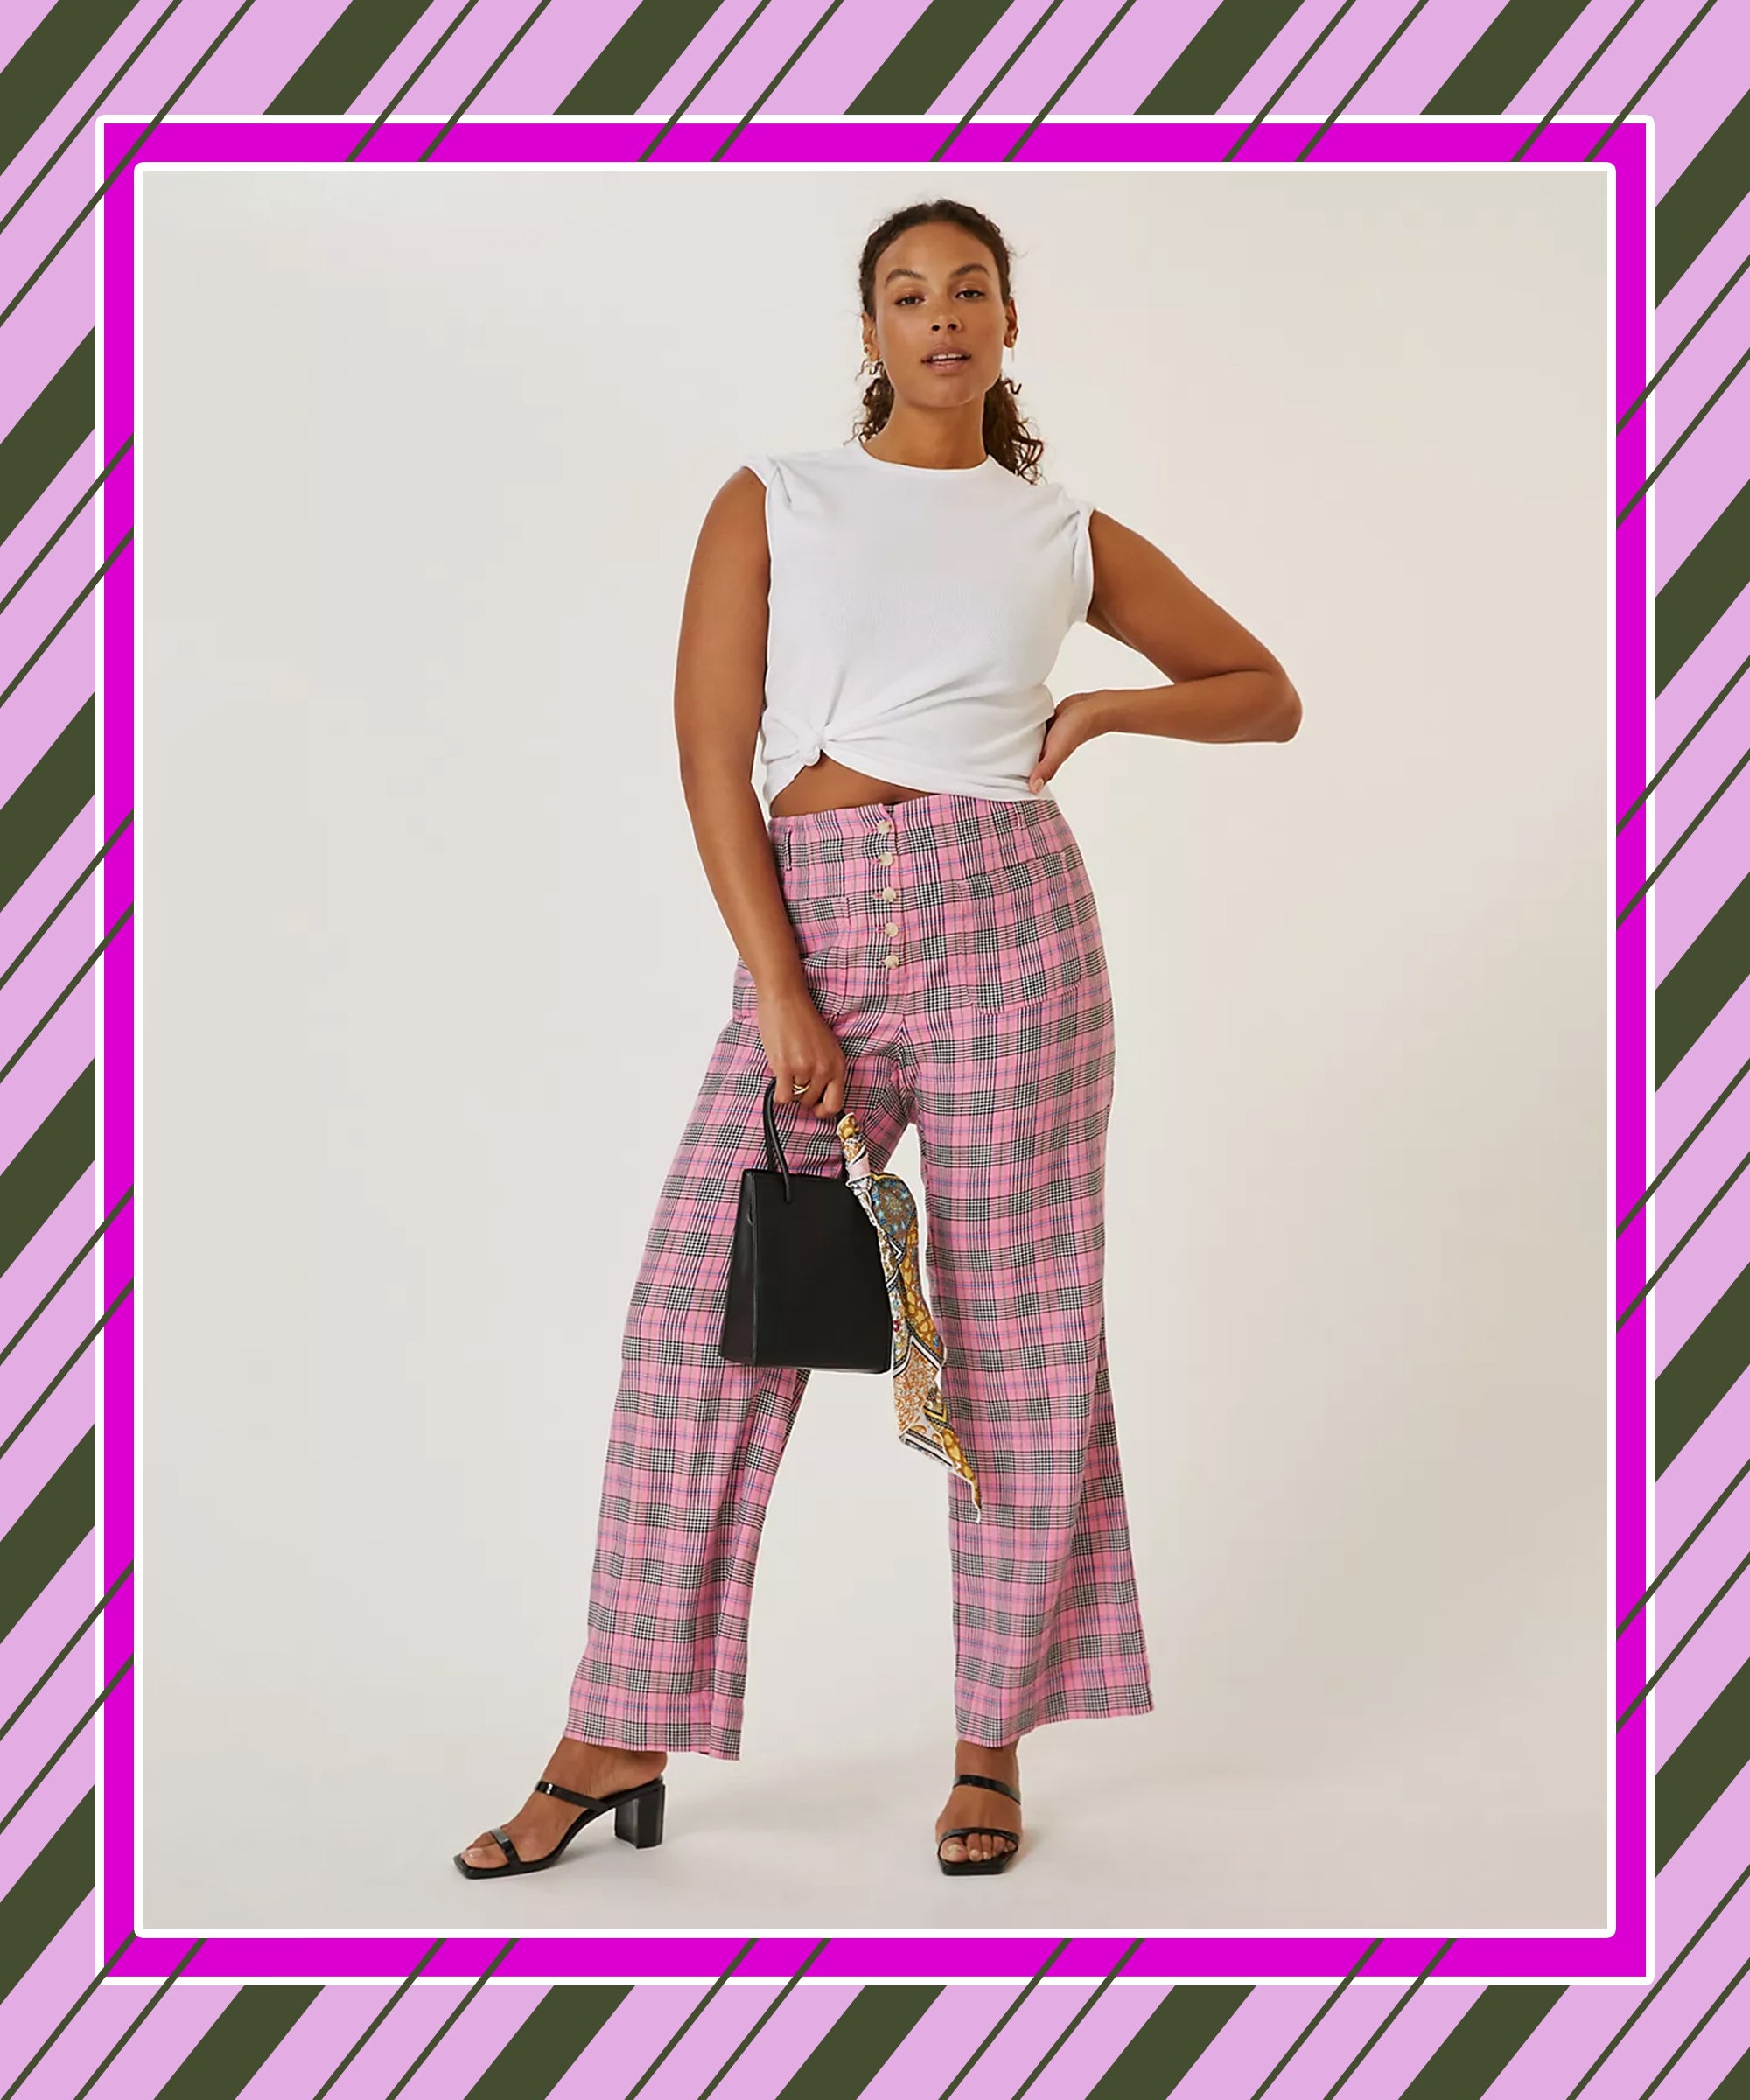 🌟 Embrace the Funk with Fun Funky Pants! 🌈 Whether it's vibrant prints,  bold patterns, or quirky designs, funky pants add that ex... | Instagram